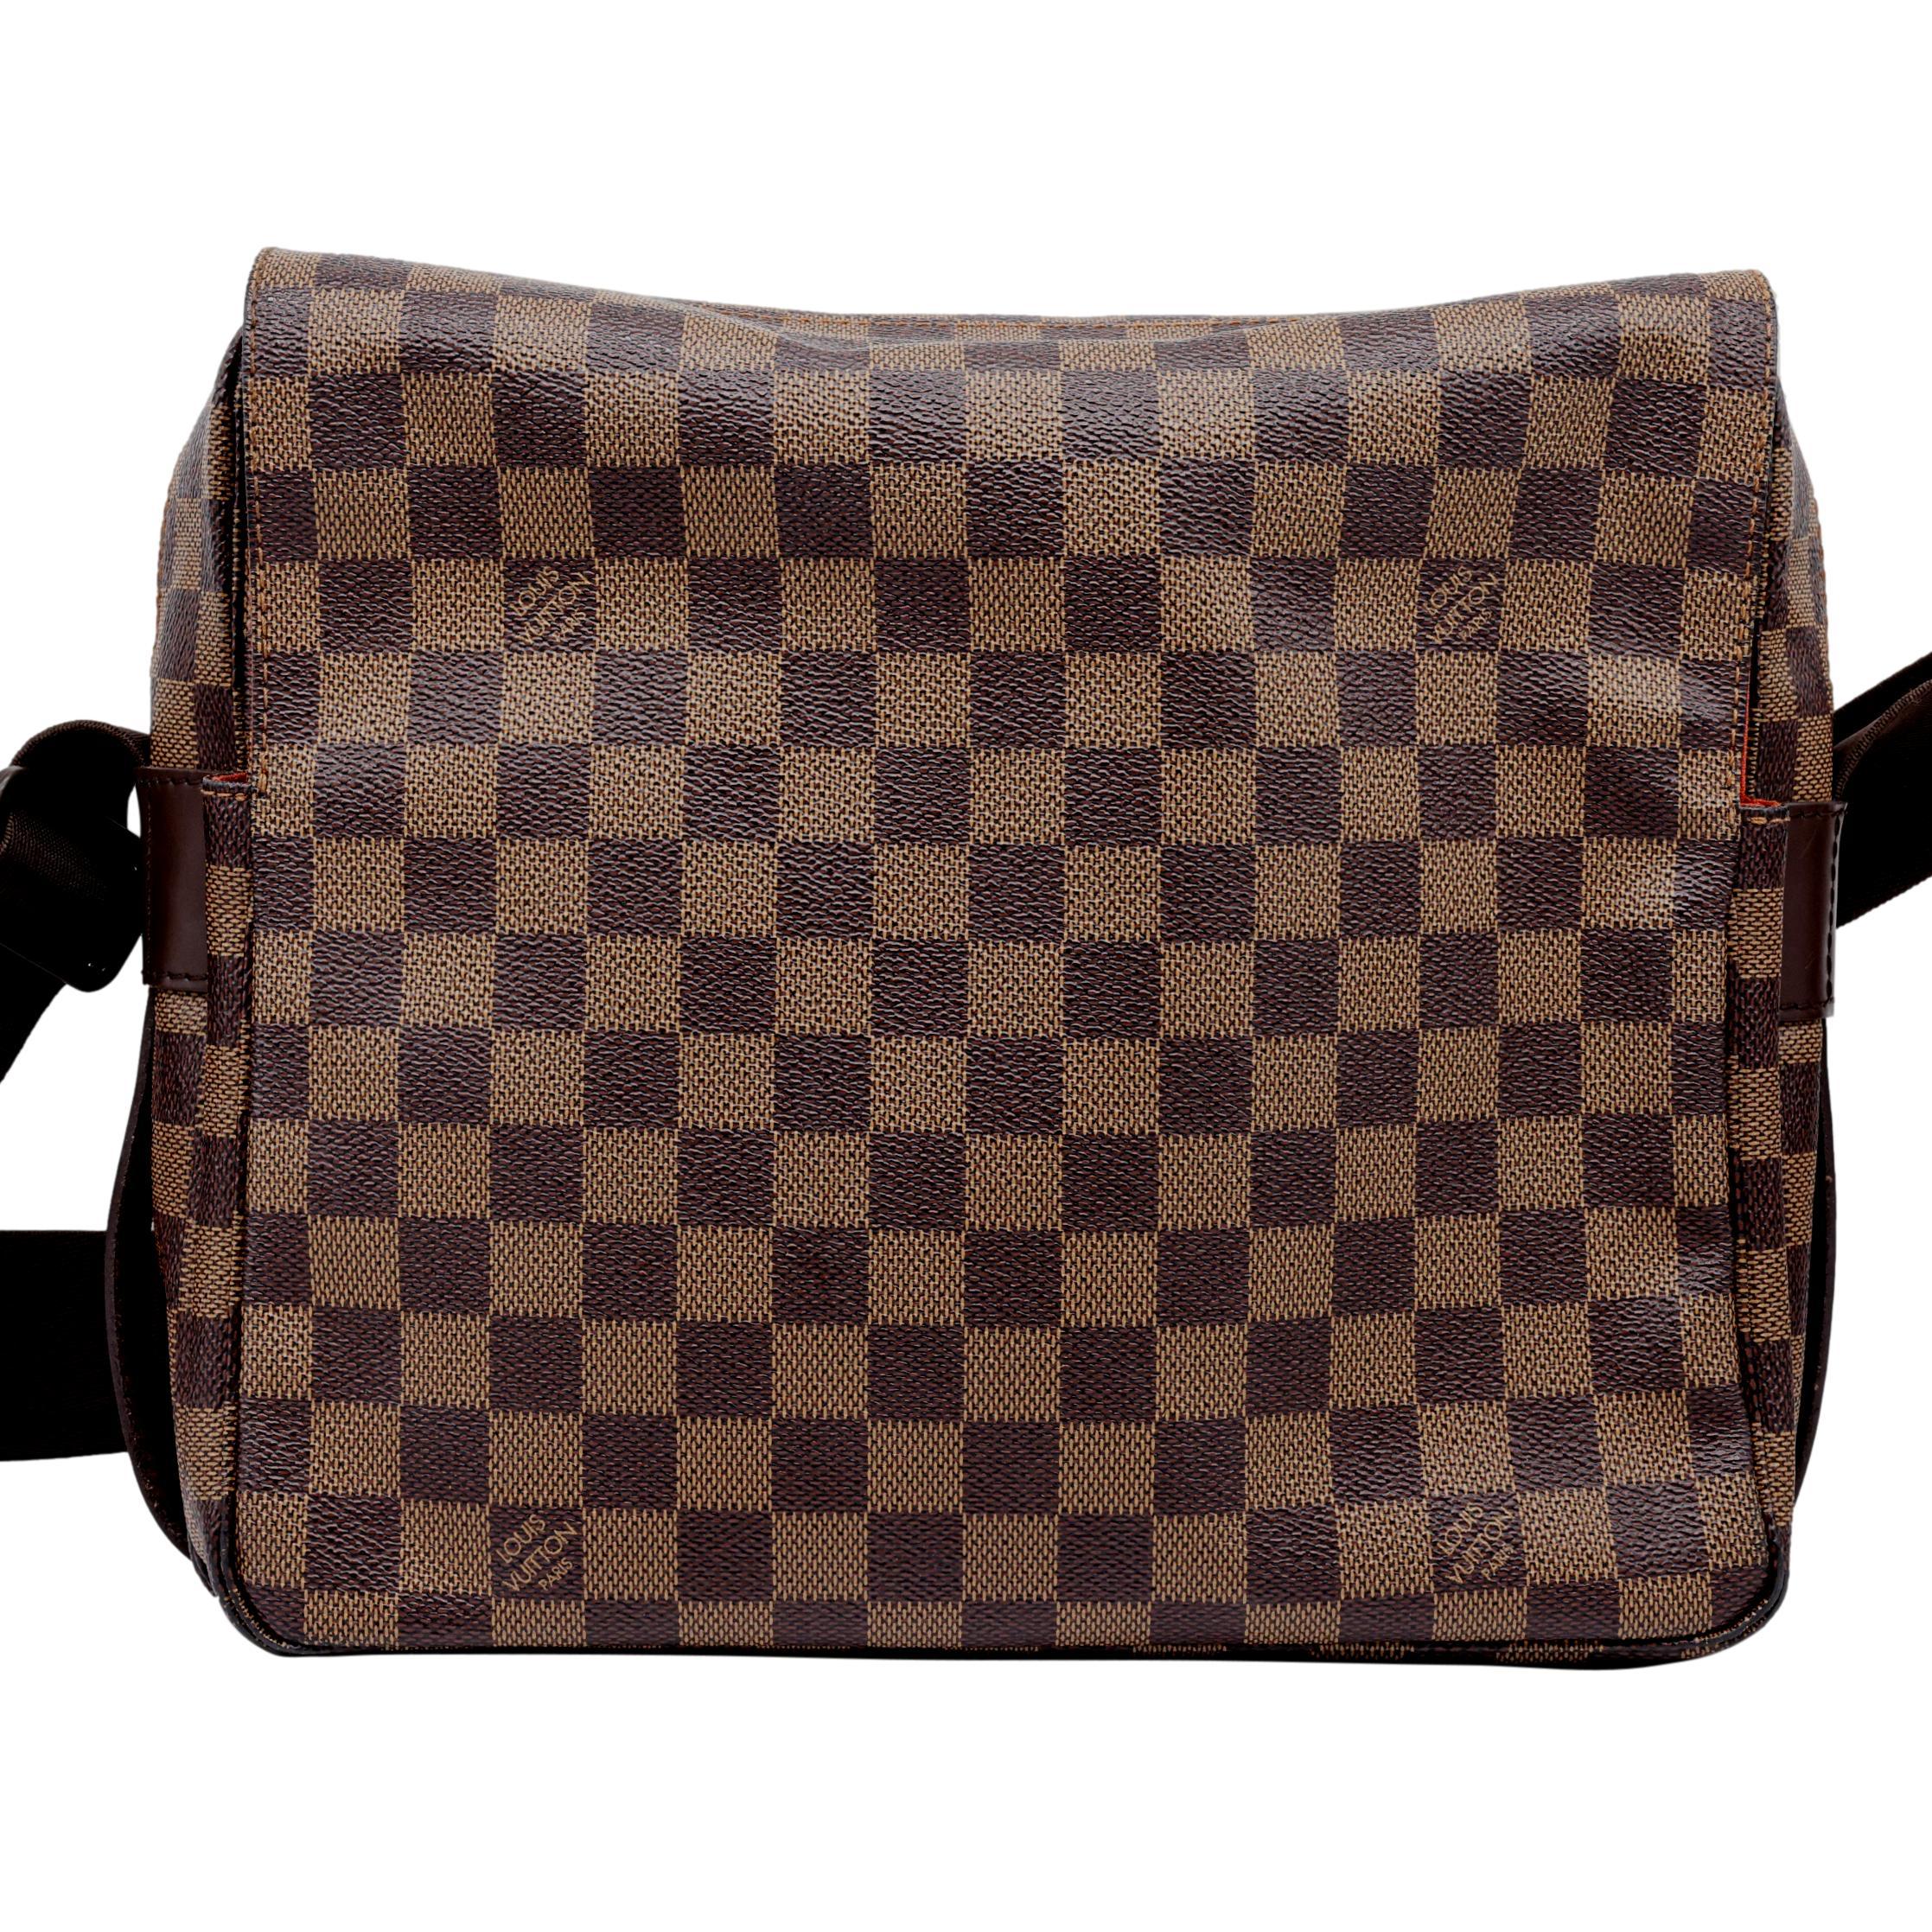 Louis Vuitton Damier Ebene Naviglio Messenger Crossbody Shoulder GM Bag, 2005. This versatile bag was first introduced in the 1970's by Vuitton as various sized bags were needed for travel, coining the name 